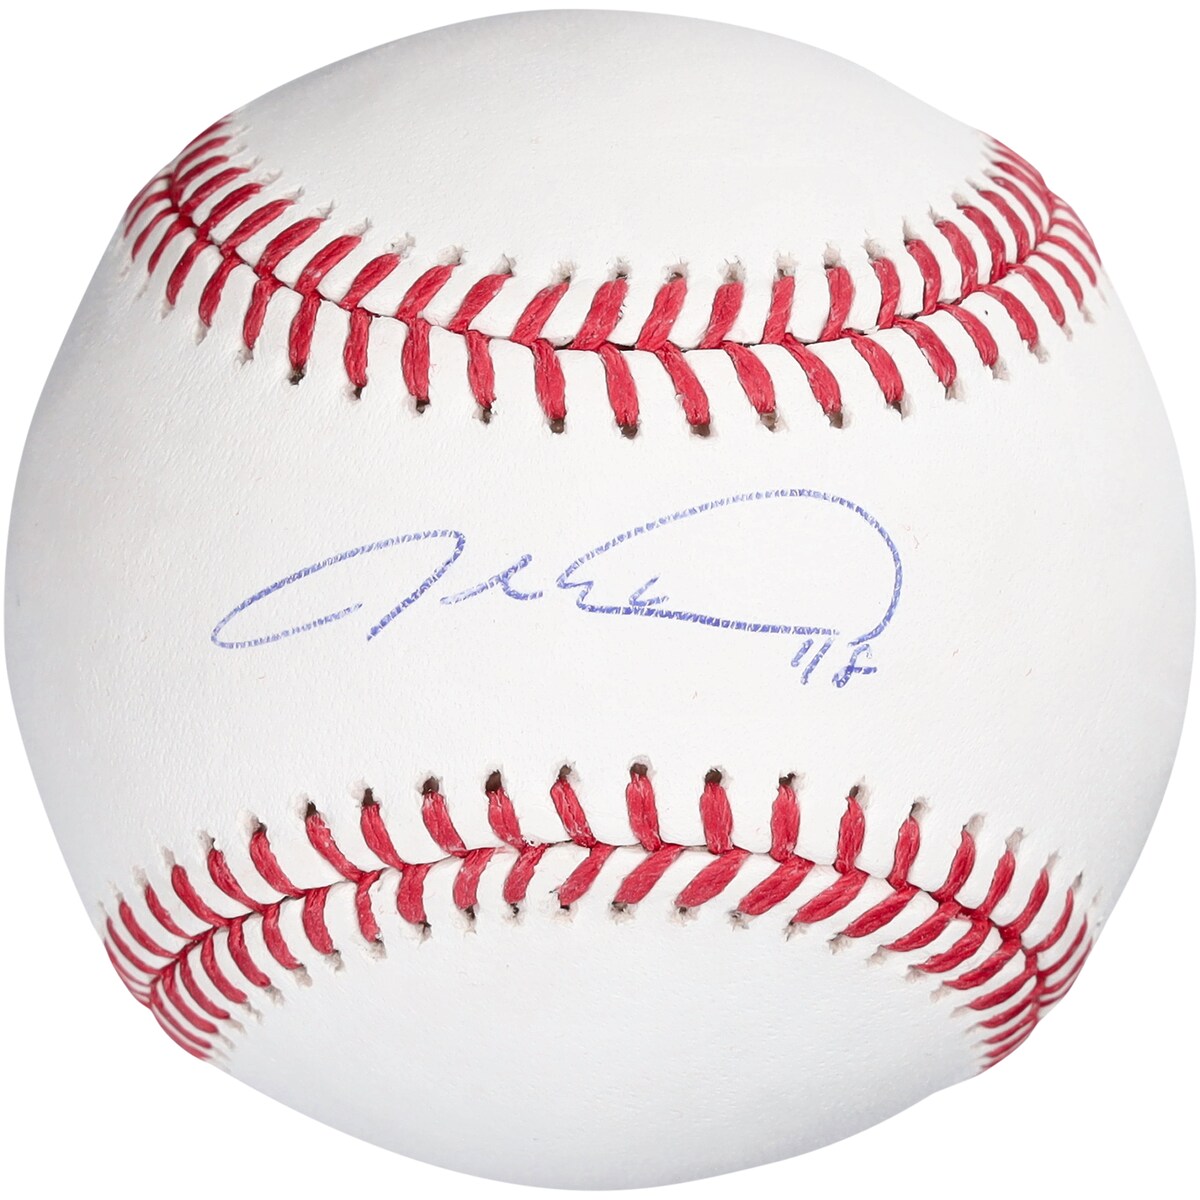 This baseball has been personally hand-signed by Jacob deGrom. It has been obtained under the auspices of the MLB Authentication Program and can be verified by its numbered hologram at MLB.com. It also comes with an individually numbered, tamper-evident hologram from Fanatics Authentic. To ensure authenticity, the hologram can be reviewed online. This process helps to ensure that the product purchased is authentic and eliminates any possibility of duplication or fraud.Comes with tamper-evident hologramOfficially licensed by MLBImportedOfficially licensedBrand: Fanatics AuthenticSignature may varyAutographed baseball